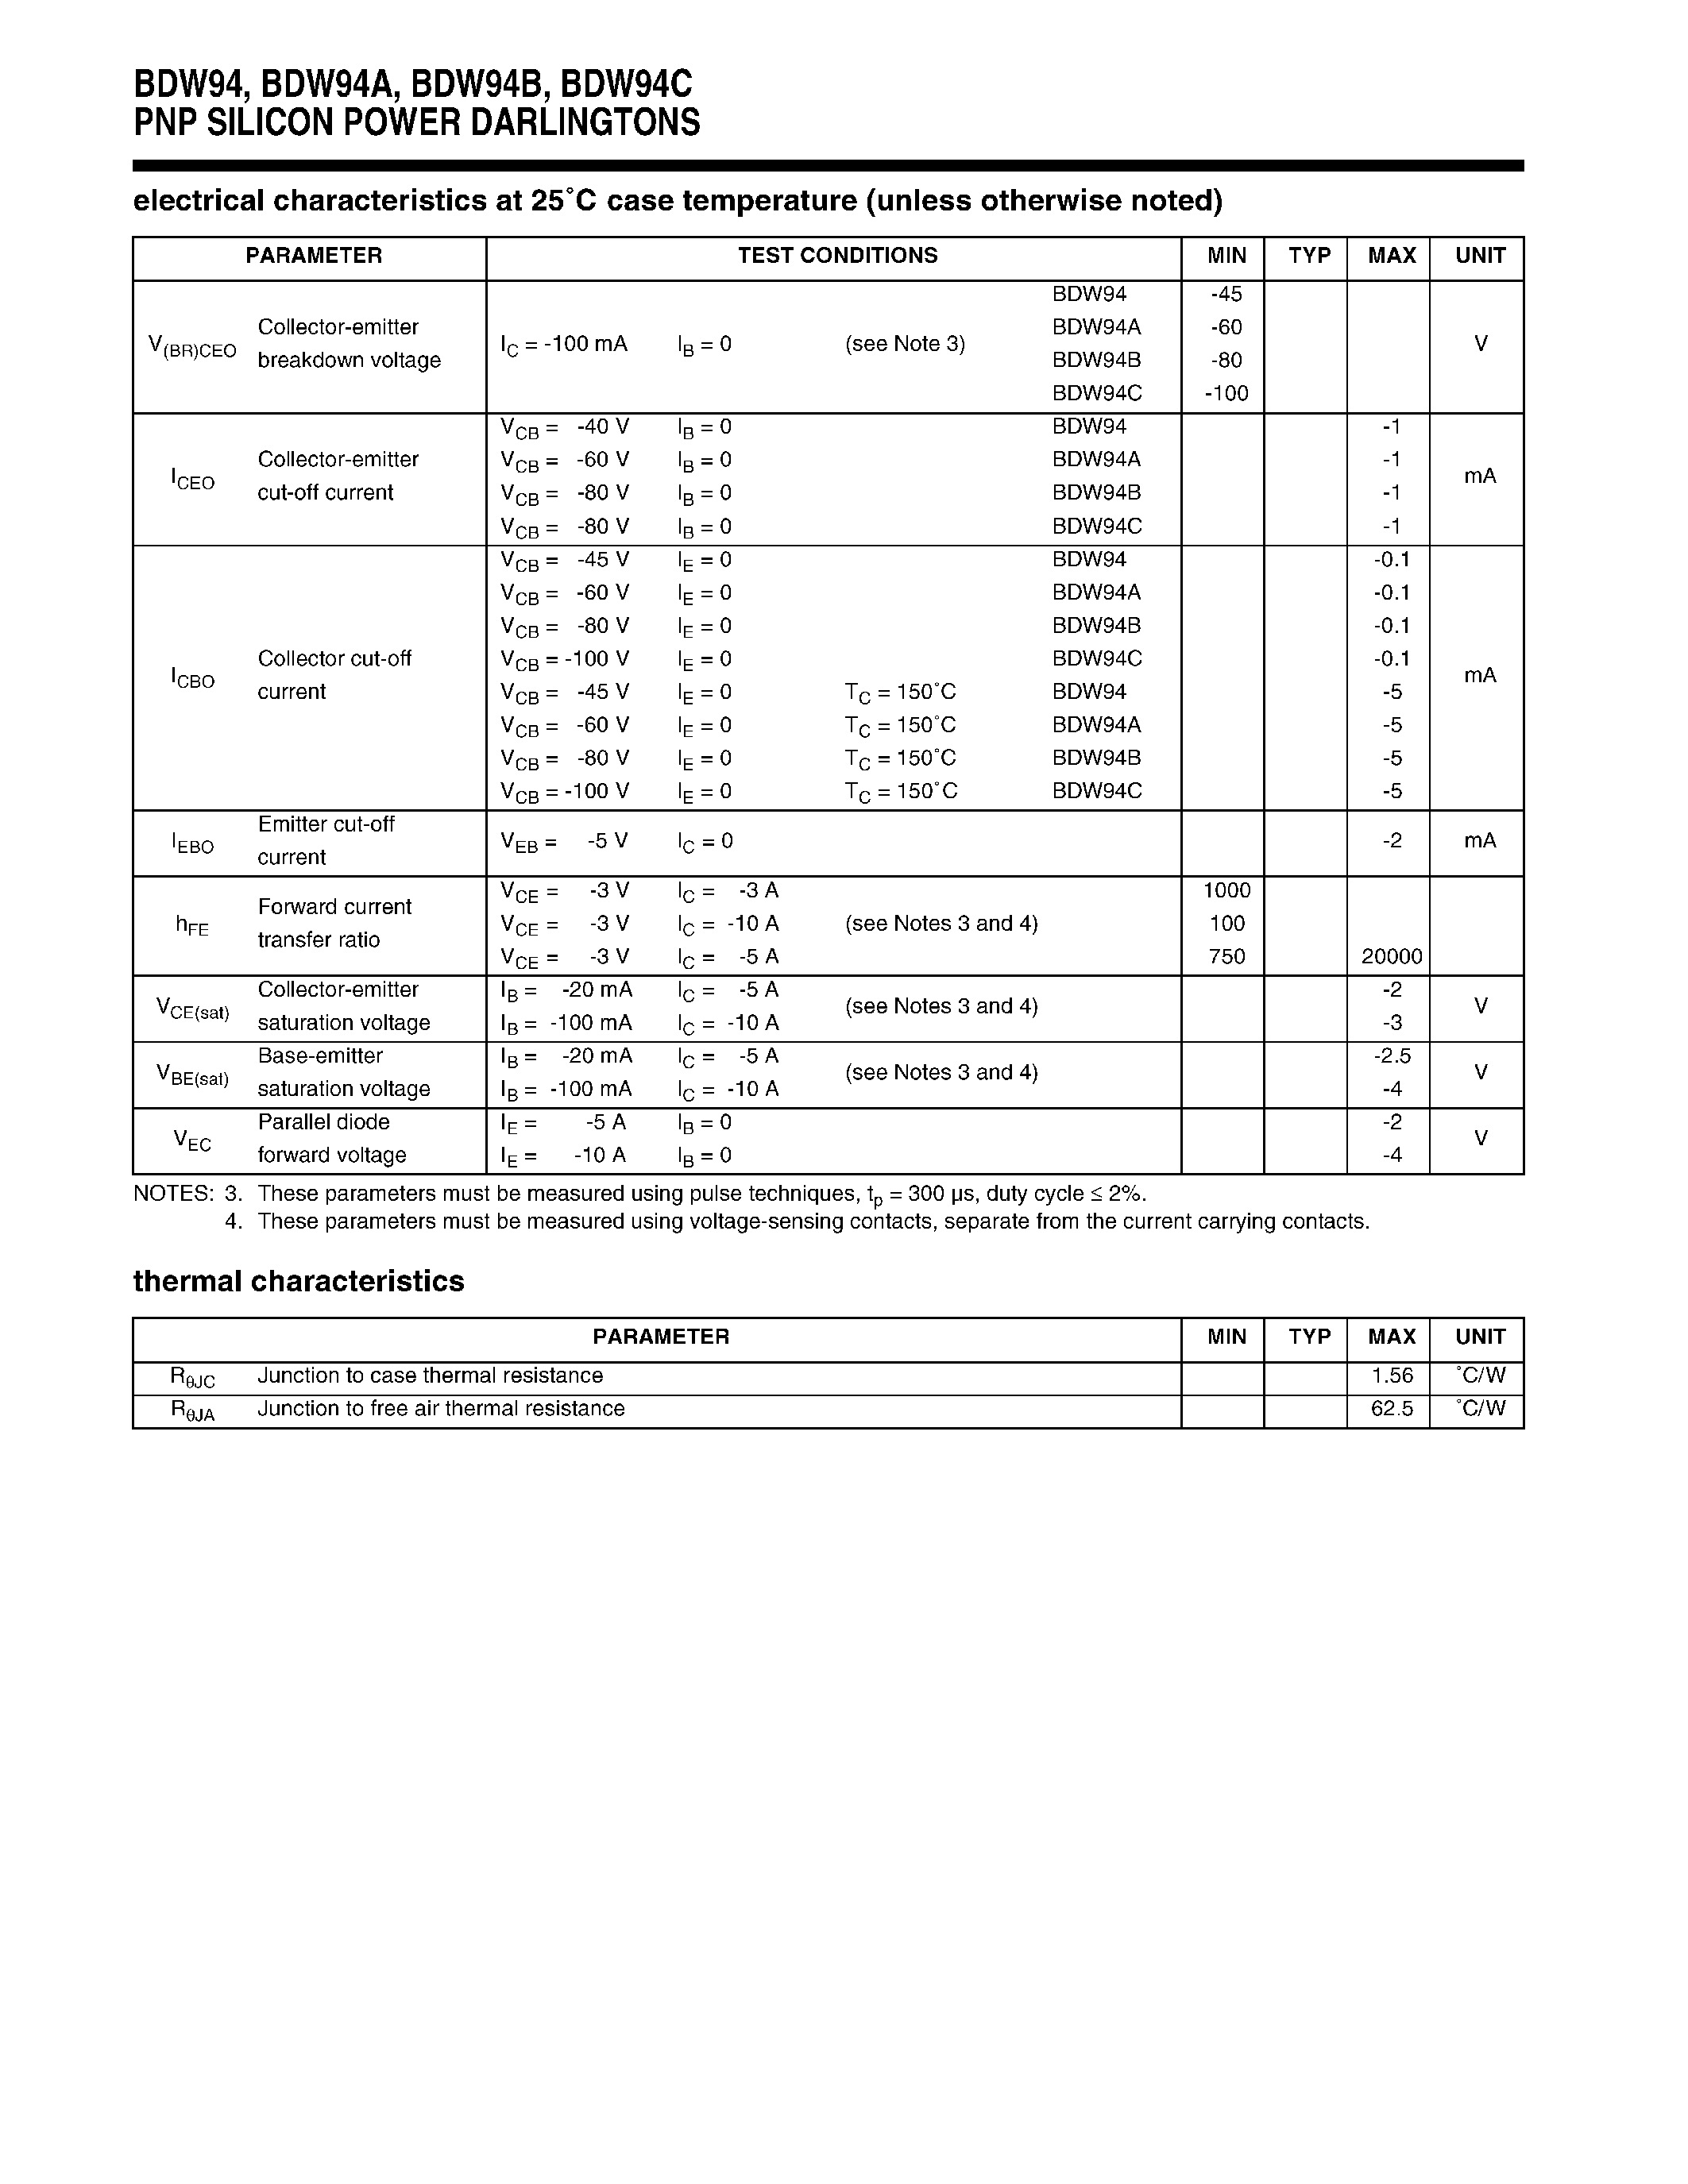 Datasheet BDW94A - PNP SILICON POWER DARLINGTONS page 2